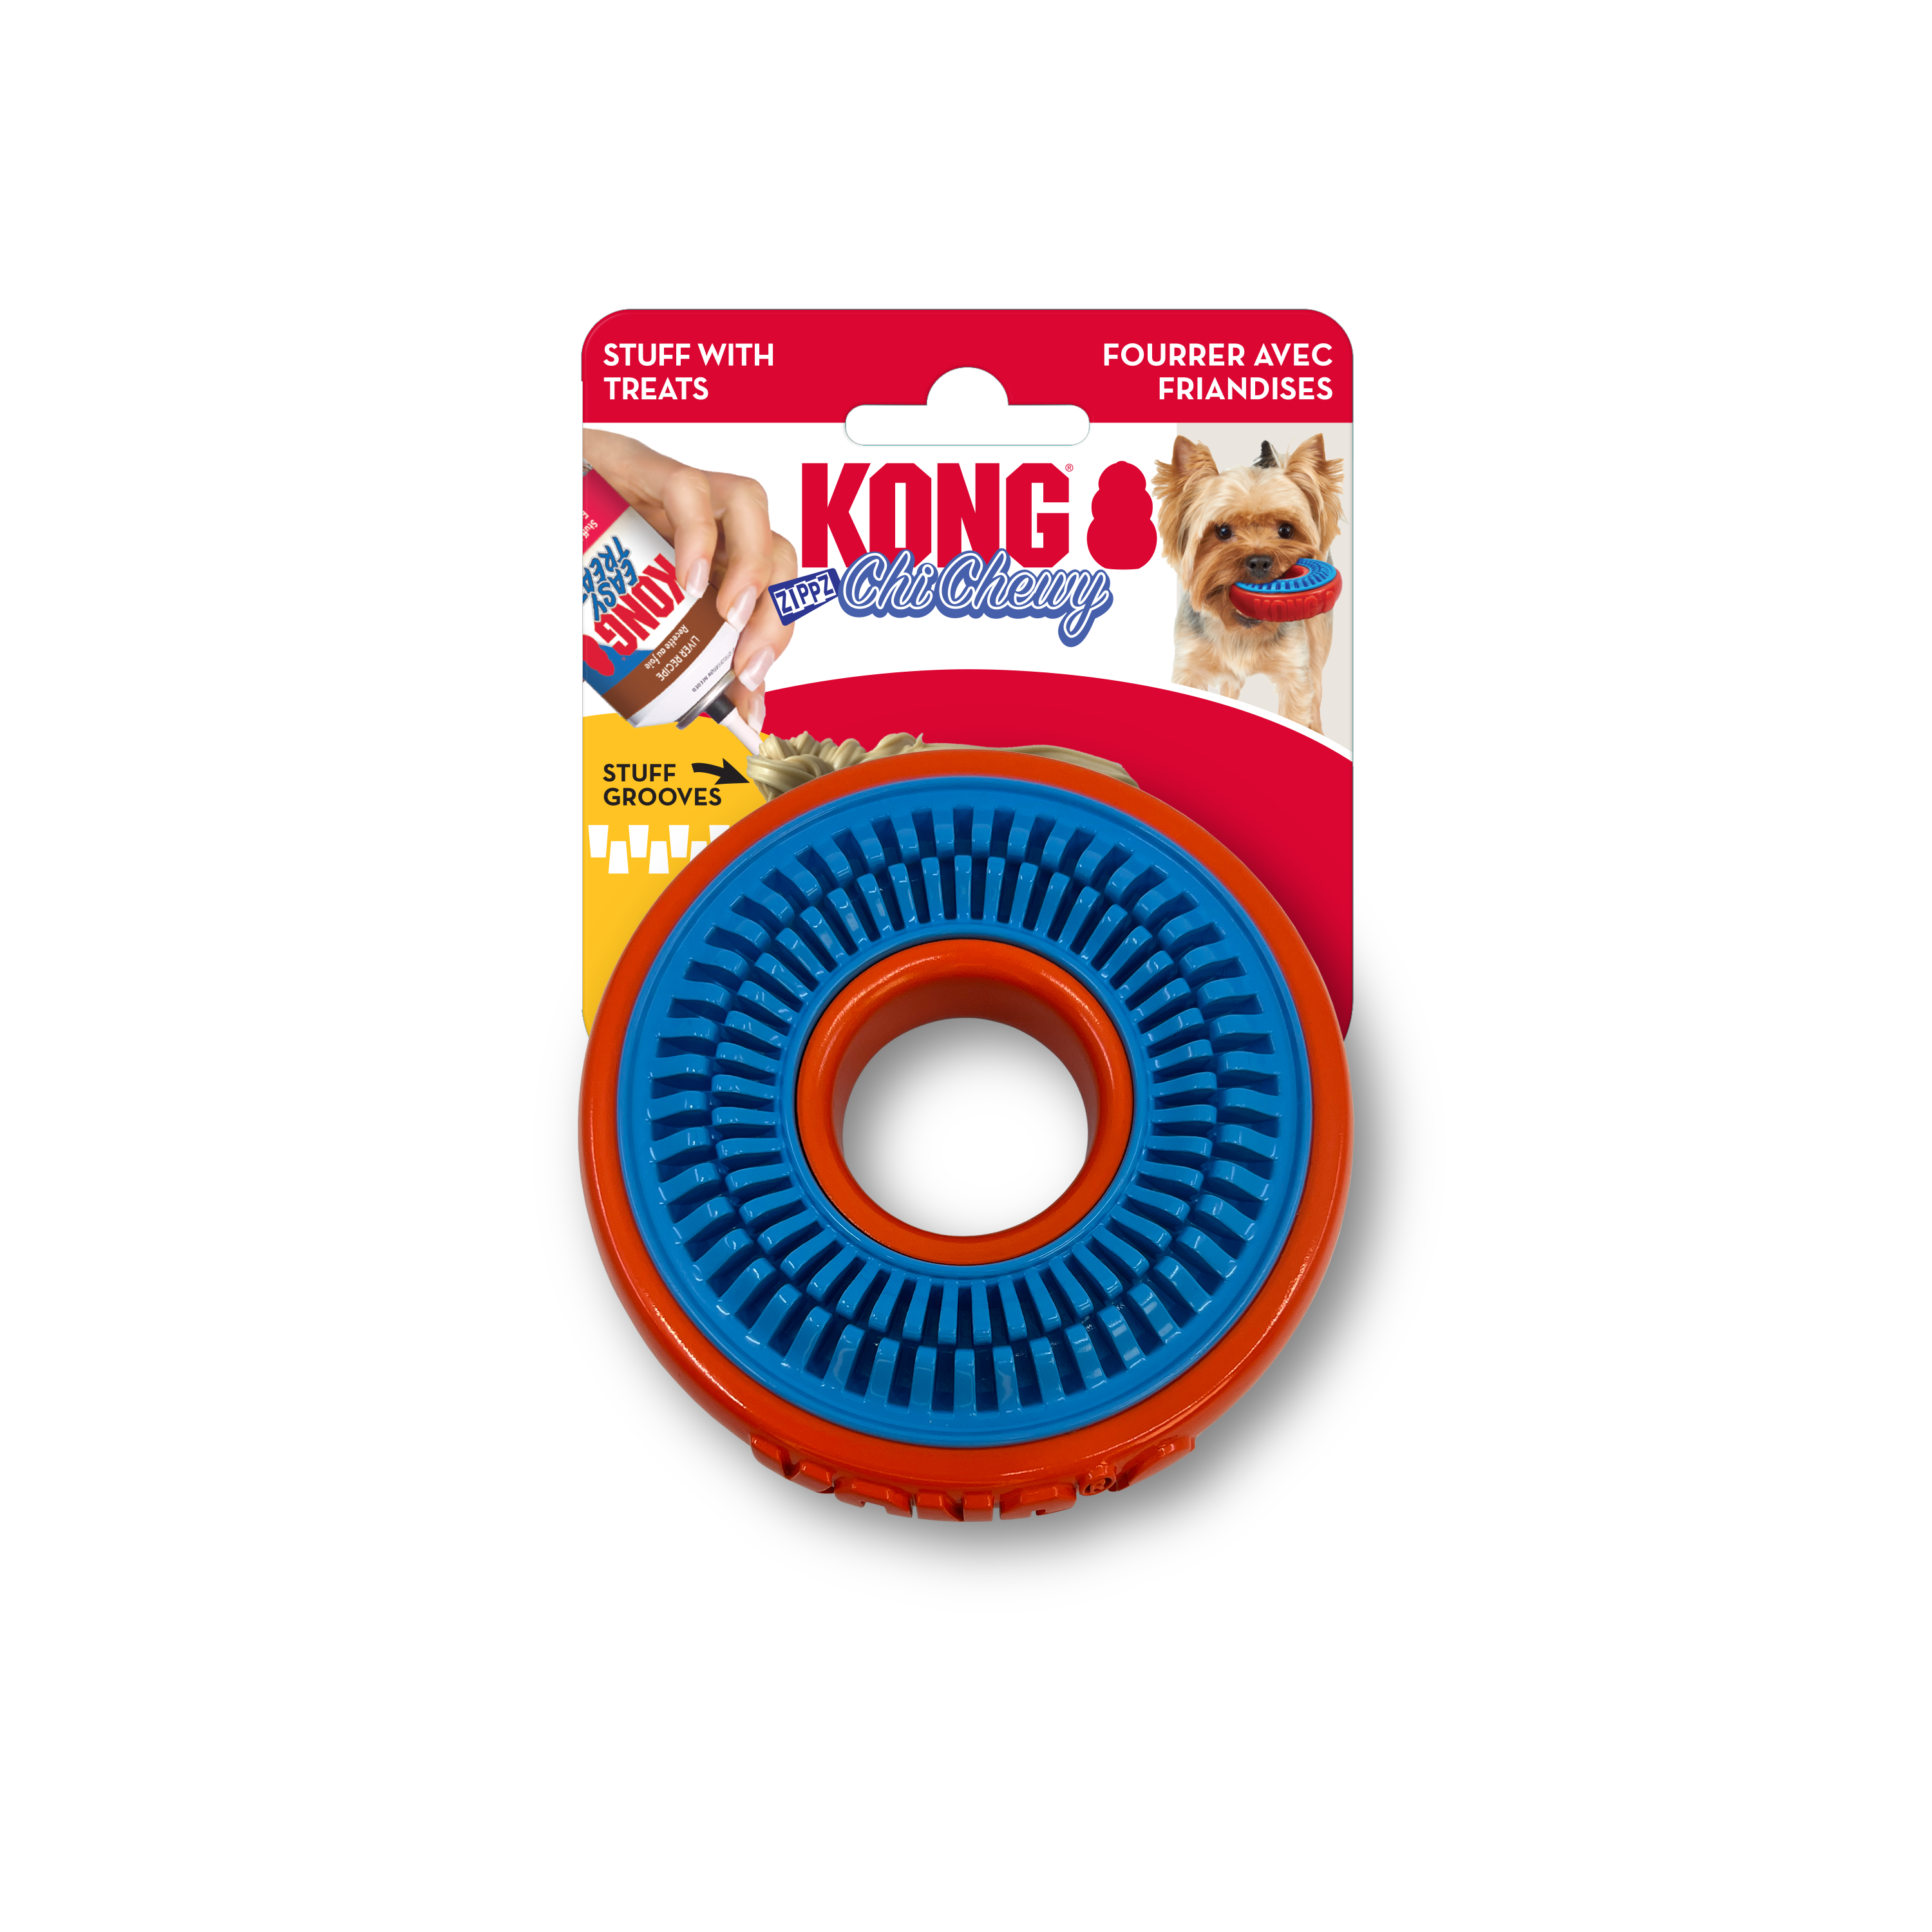 ChiChewy Zippz Ring onpack product image